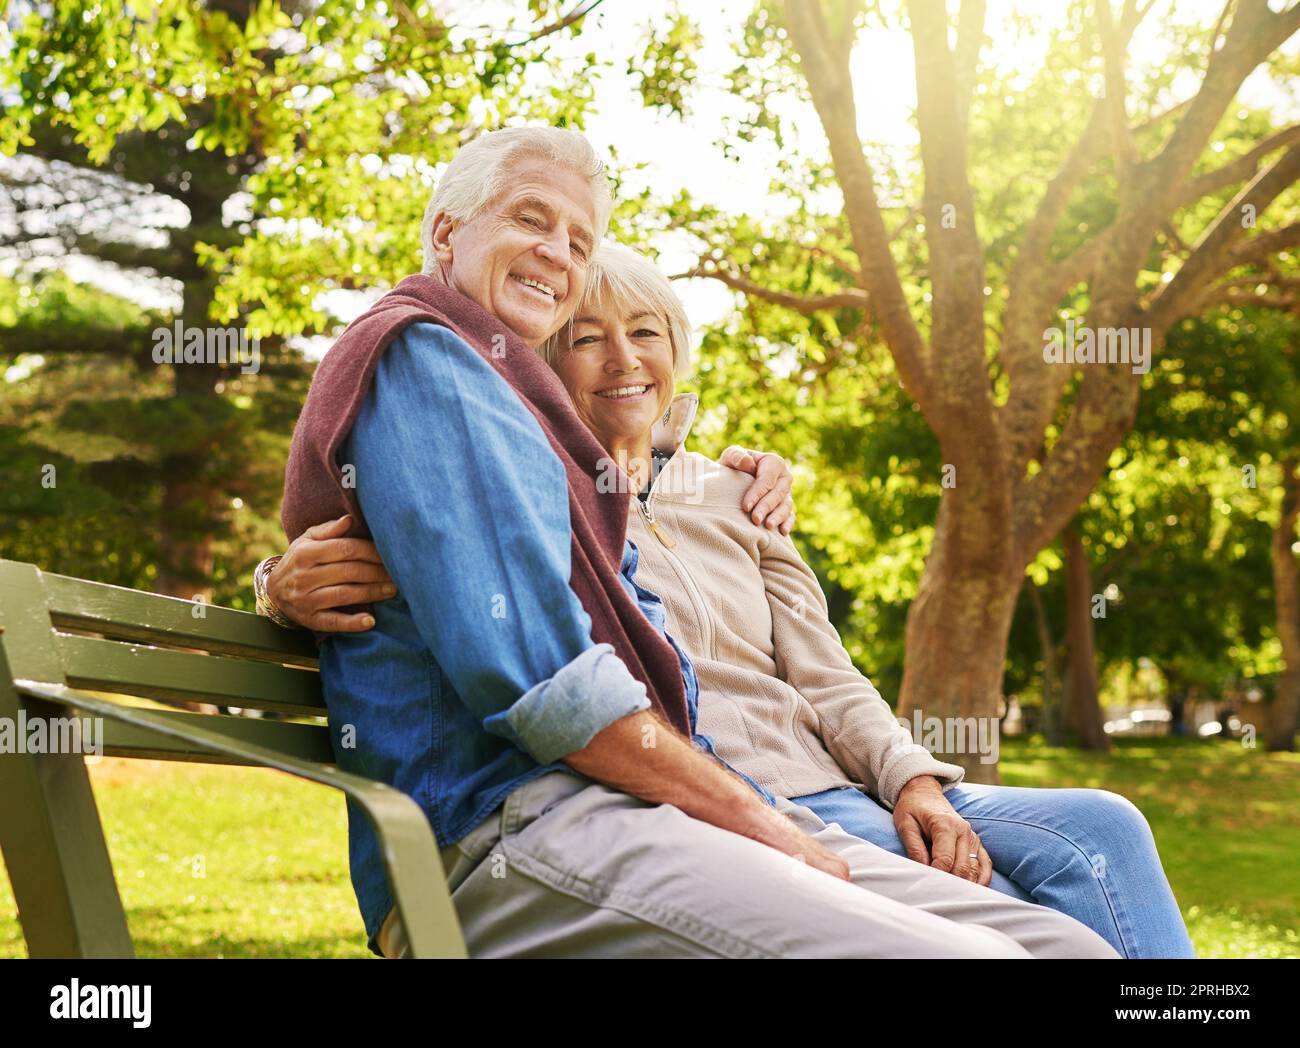 The relaxation starts now. Portrait of a happy senior couple relaxing on a park bench. Stock Photo